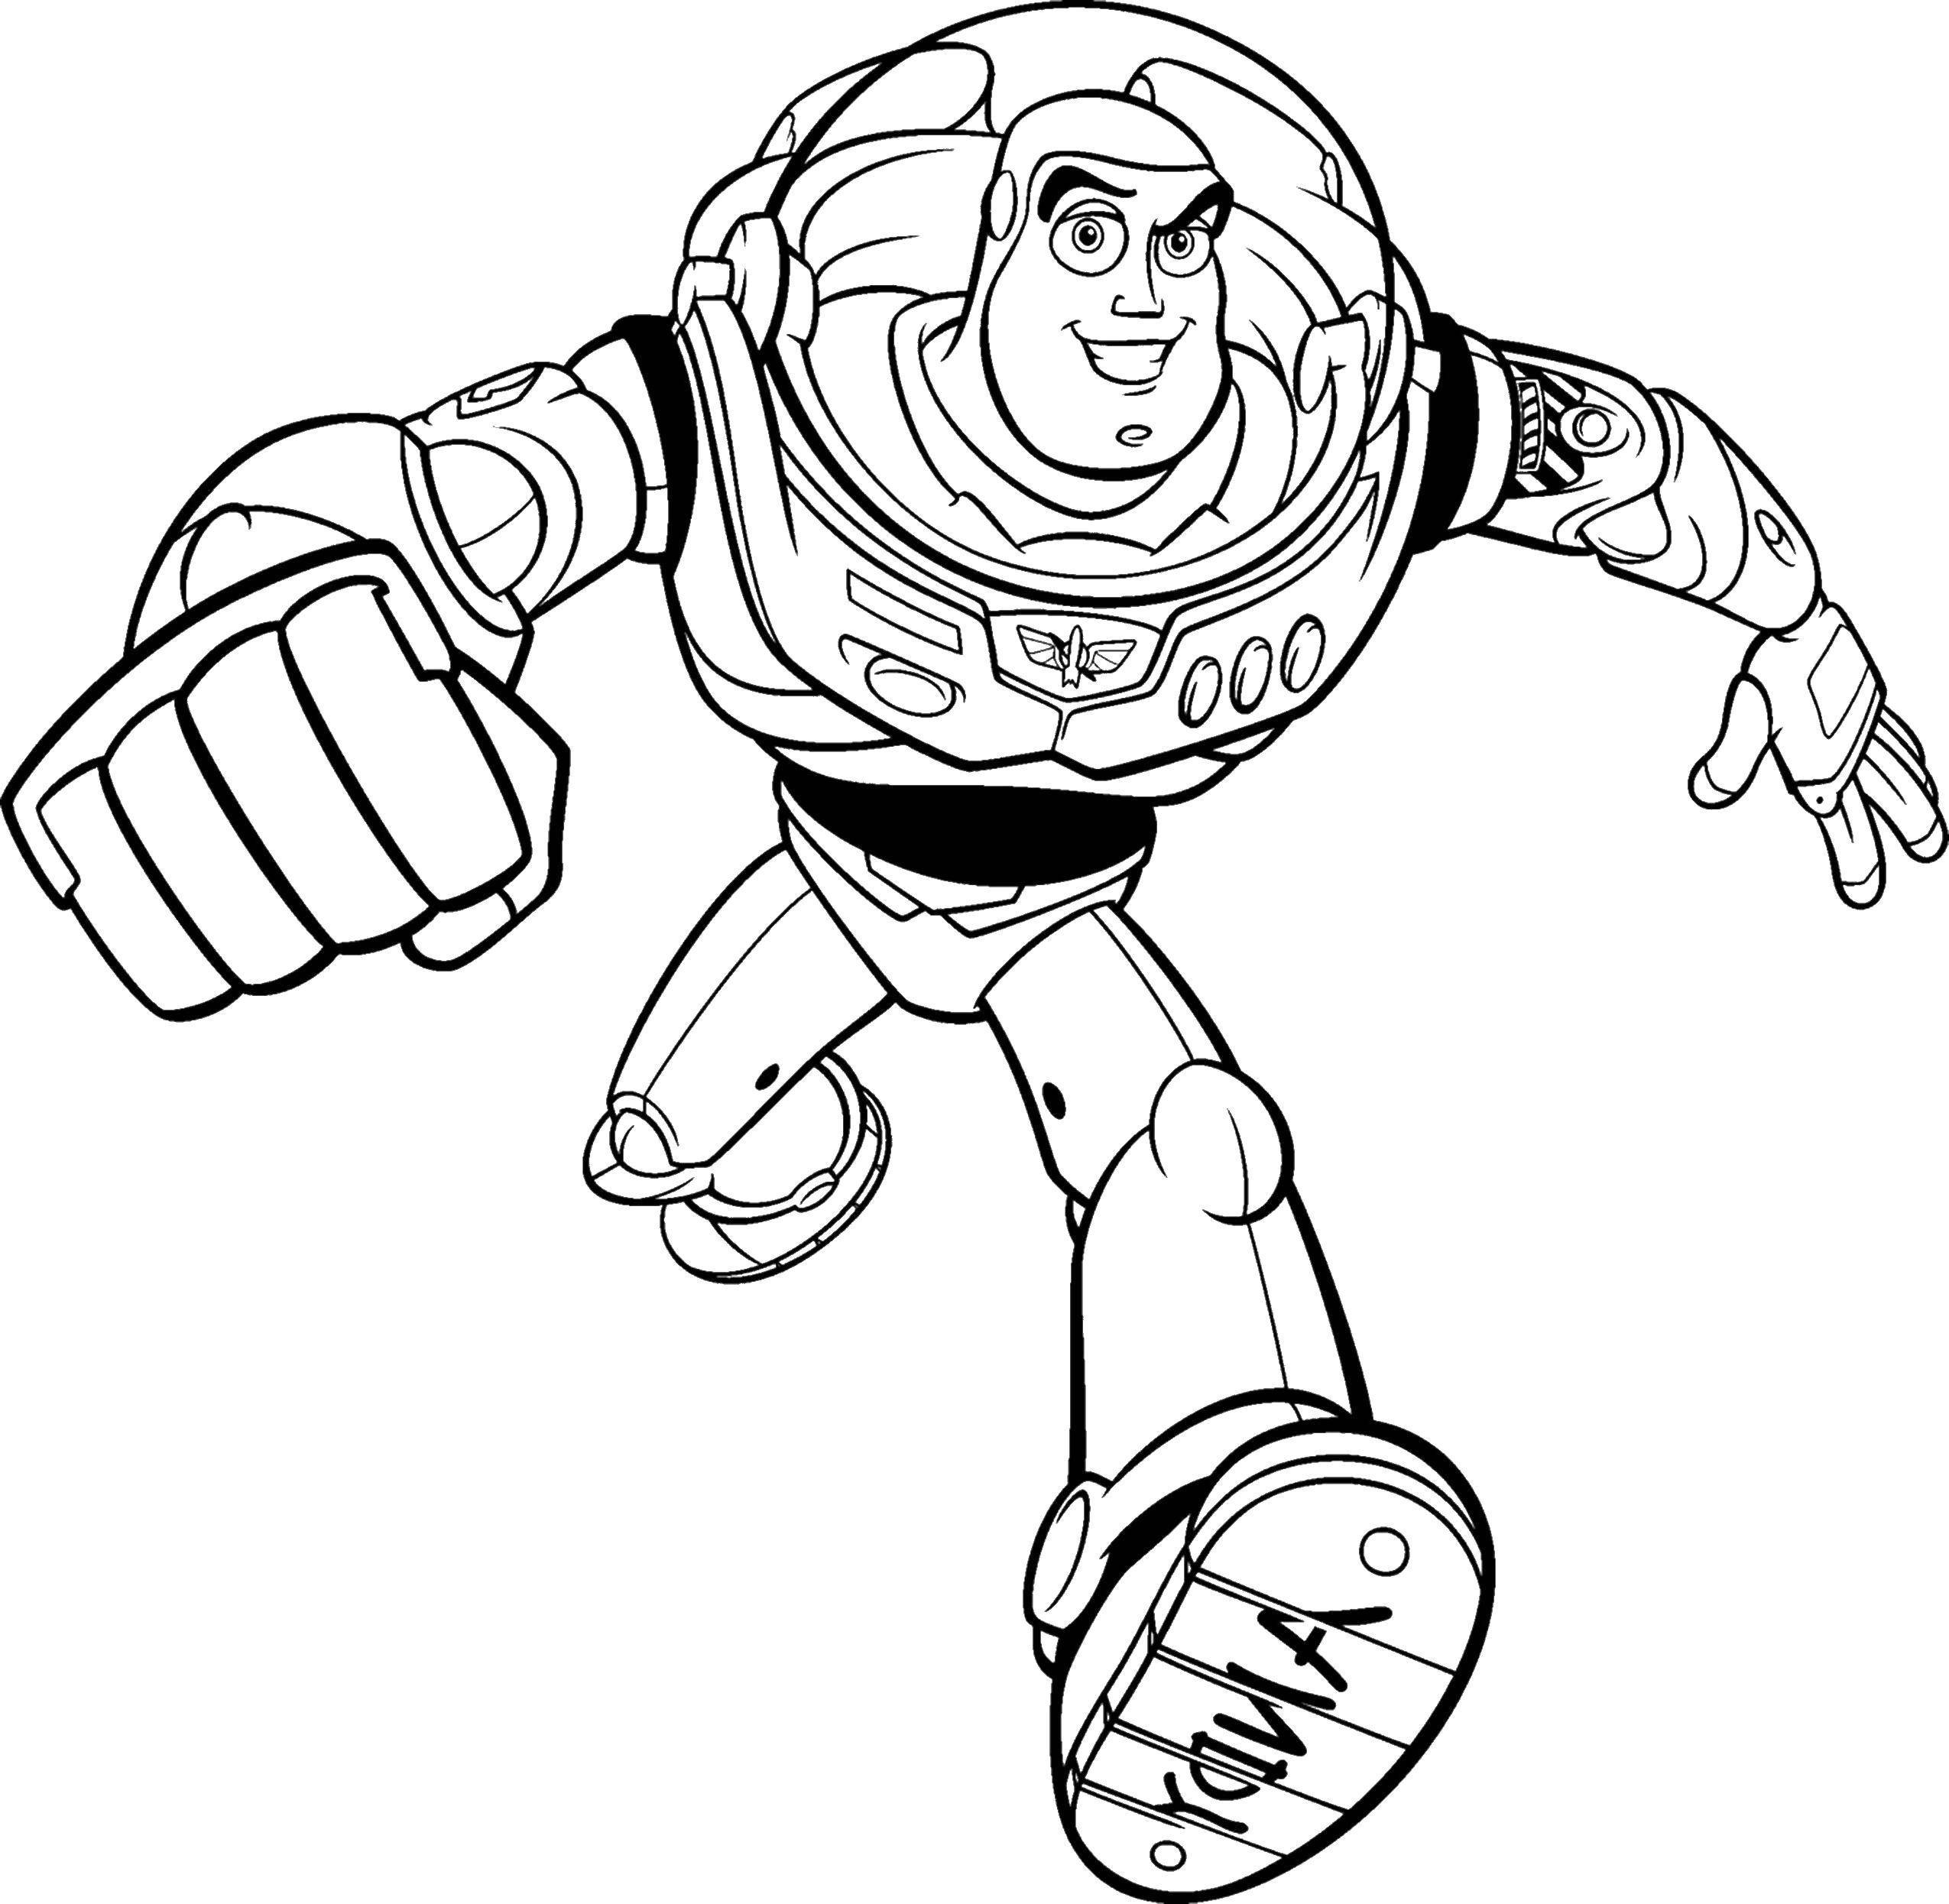 Coloring Buzz Lightyear from the movie. Category Coloring pages for kids. Tags:  Cartoon character, toy Story.